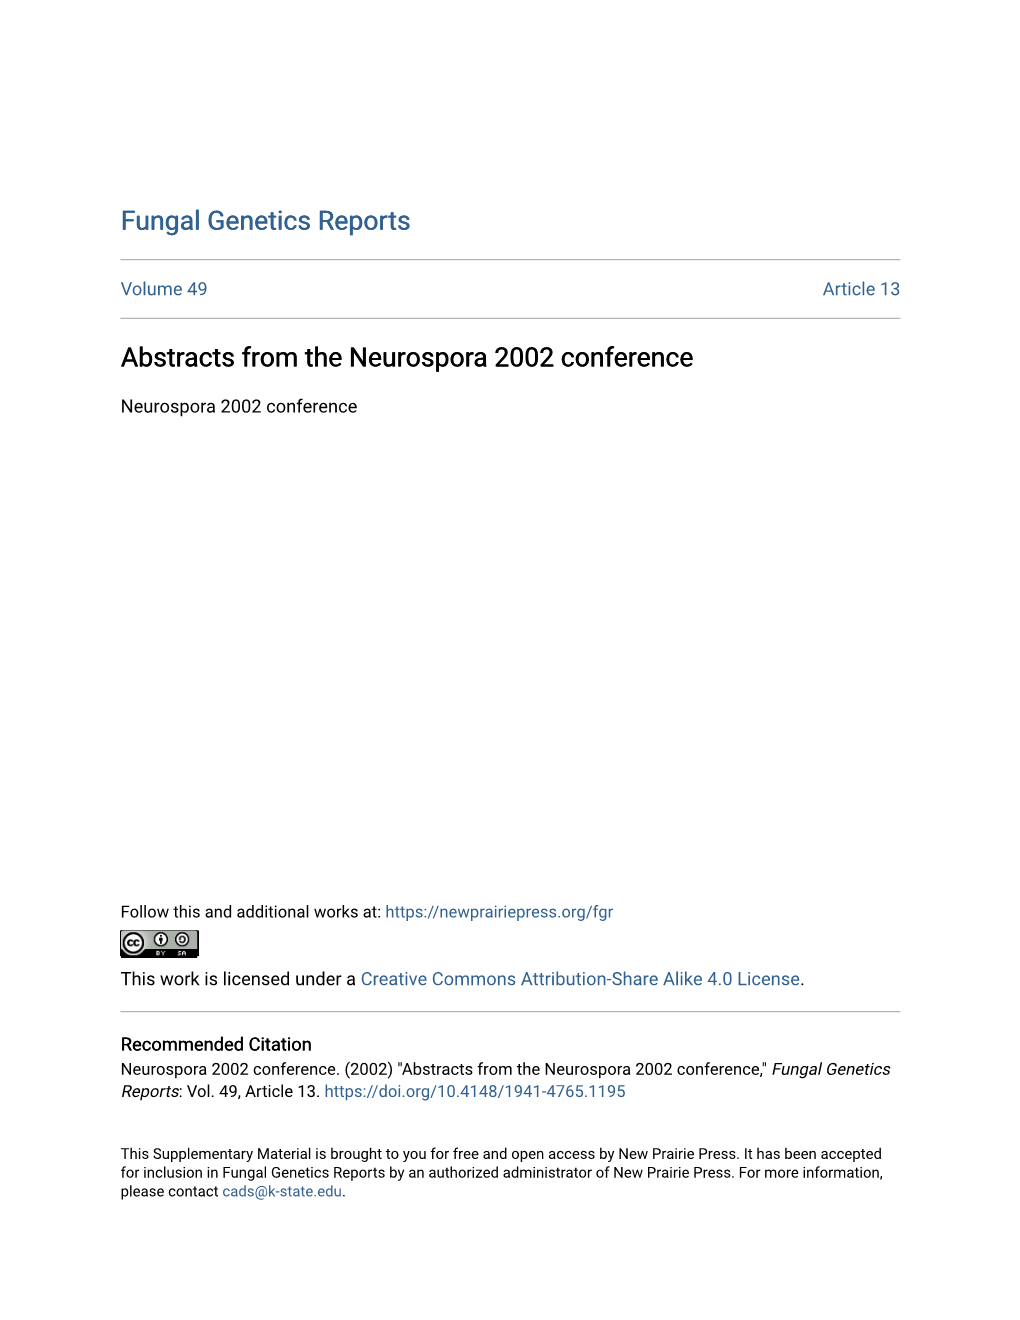 Abstracts from the Neurospora 2002 Conference